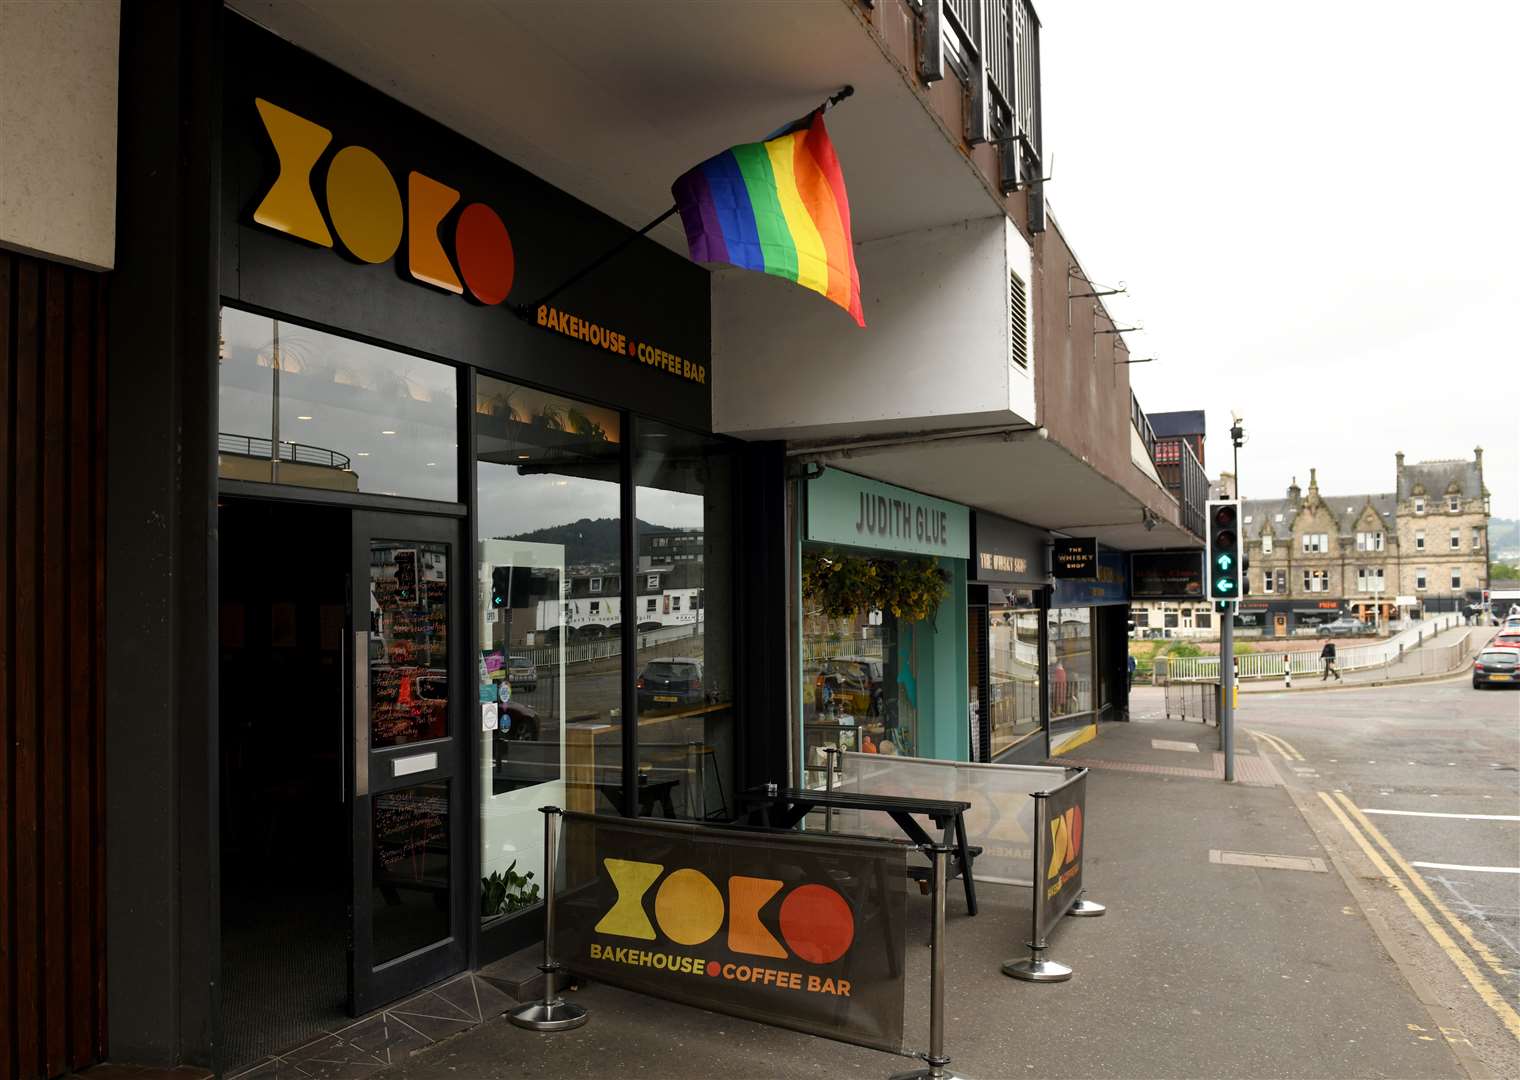 Xoko Bakehouse will not be deterred from flying their Progress Pride flag despite further backlash. Picture: James Mackenzie